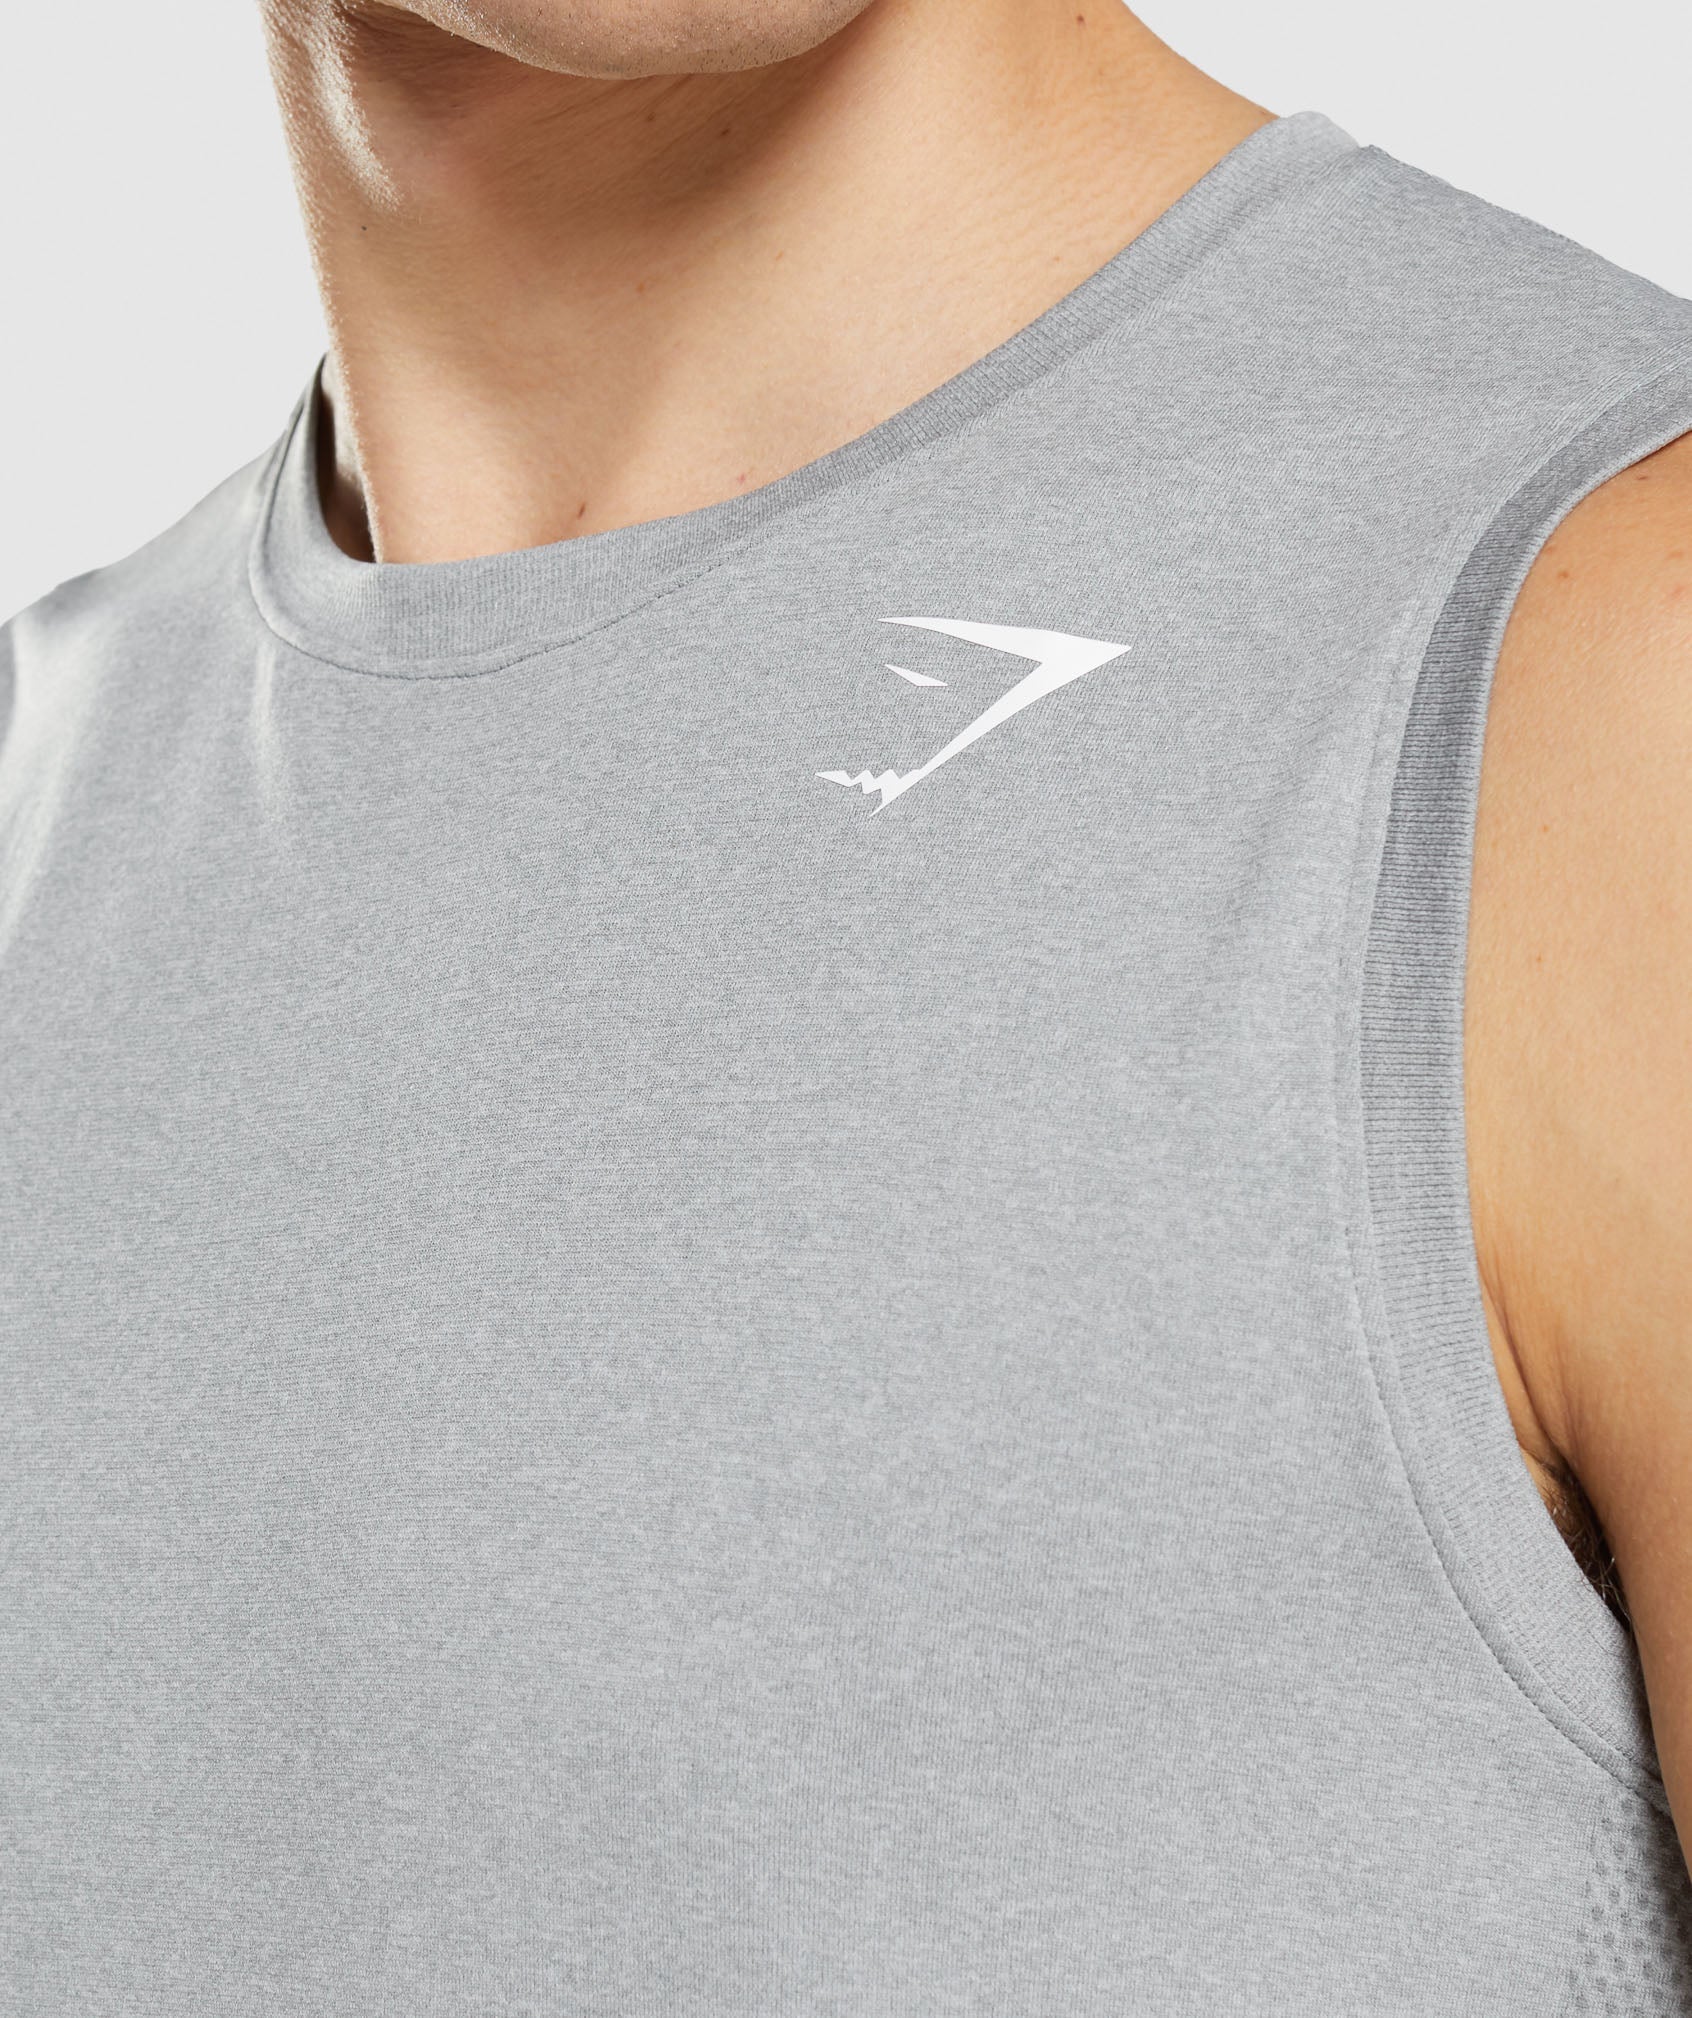 Arrival Seamless Tank in Grey - view 6